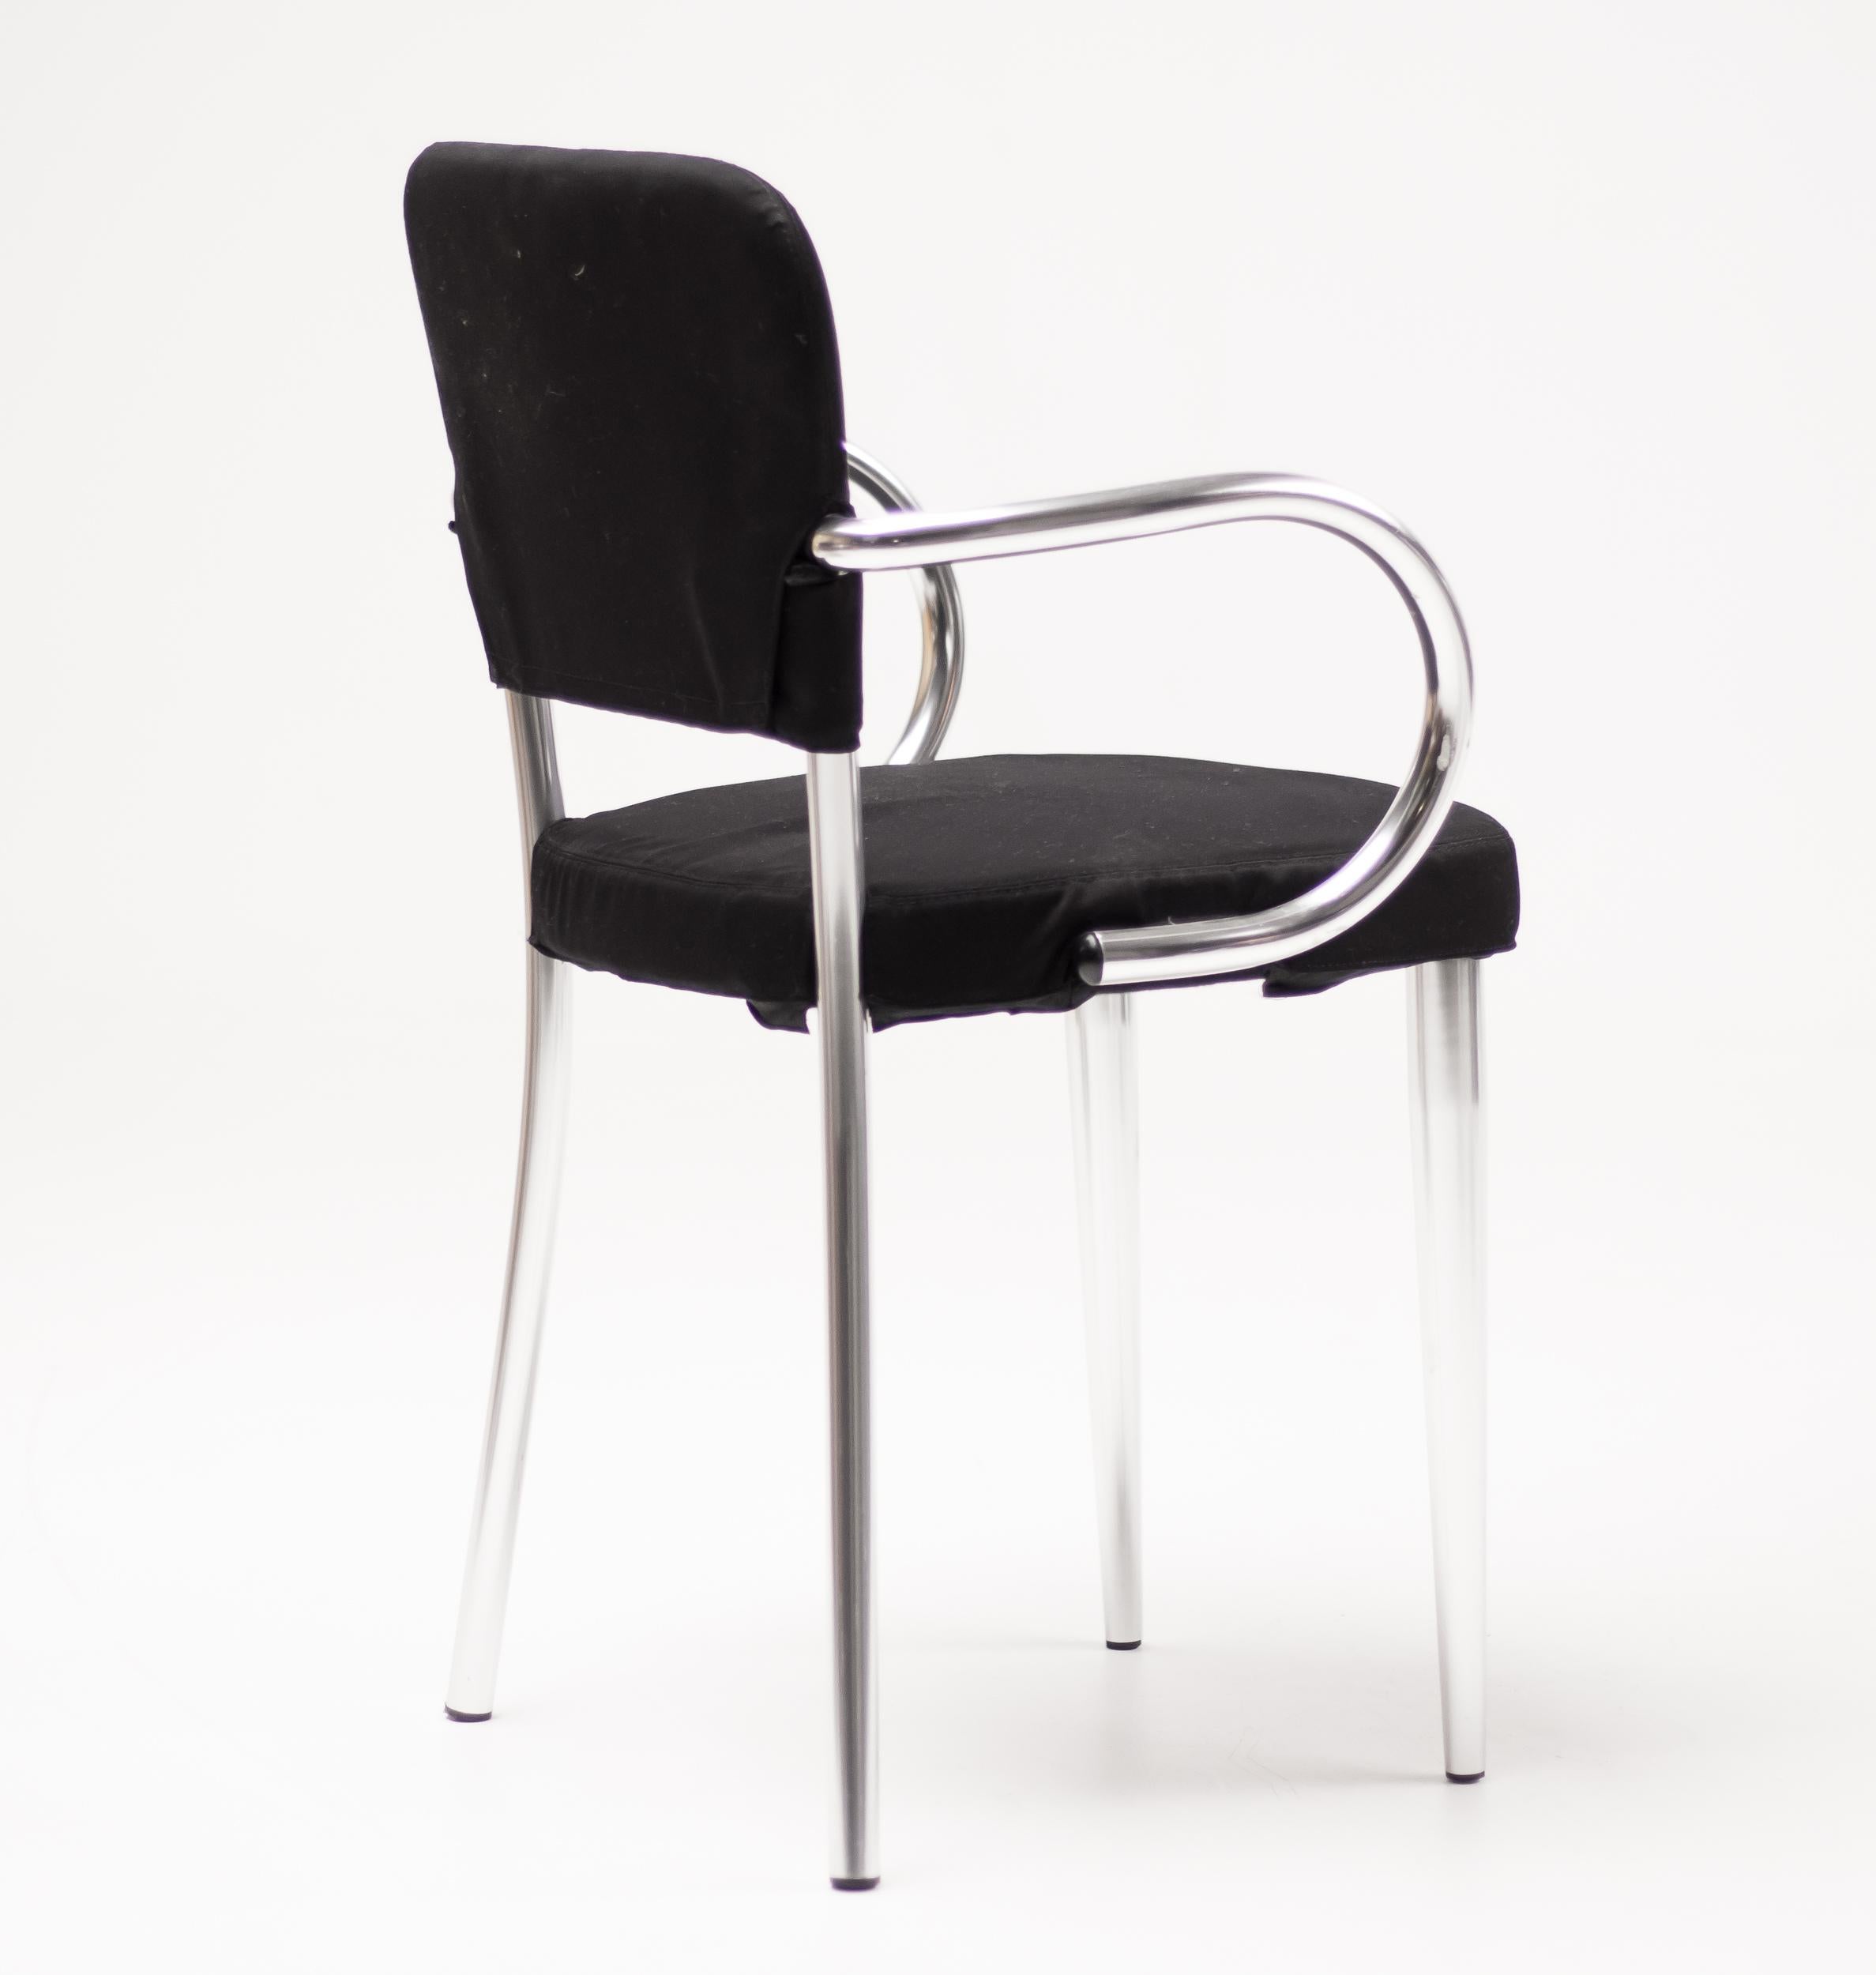 Elegant aluminium chairs, great for a restaurant or canteen.
Multiple chairs available, priced individually.

 